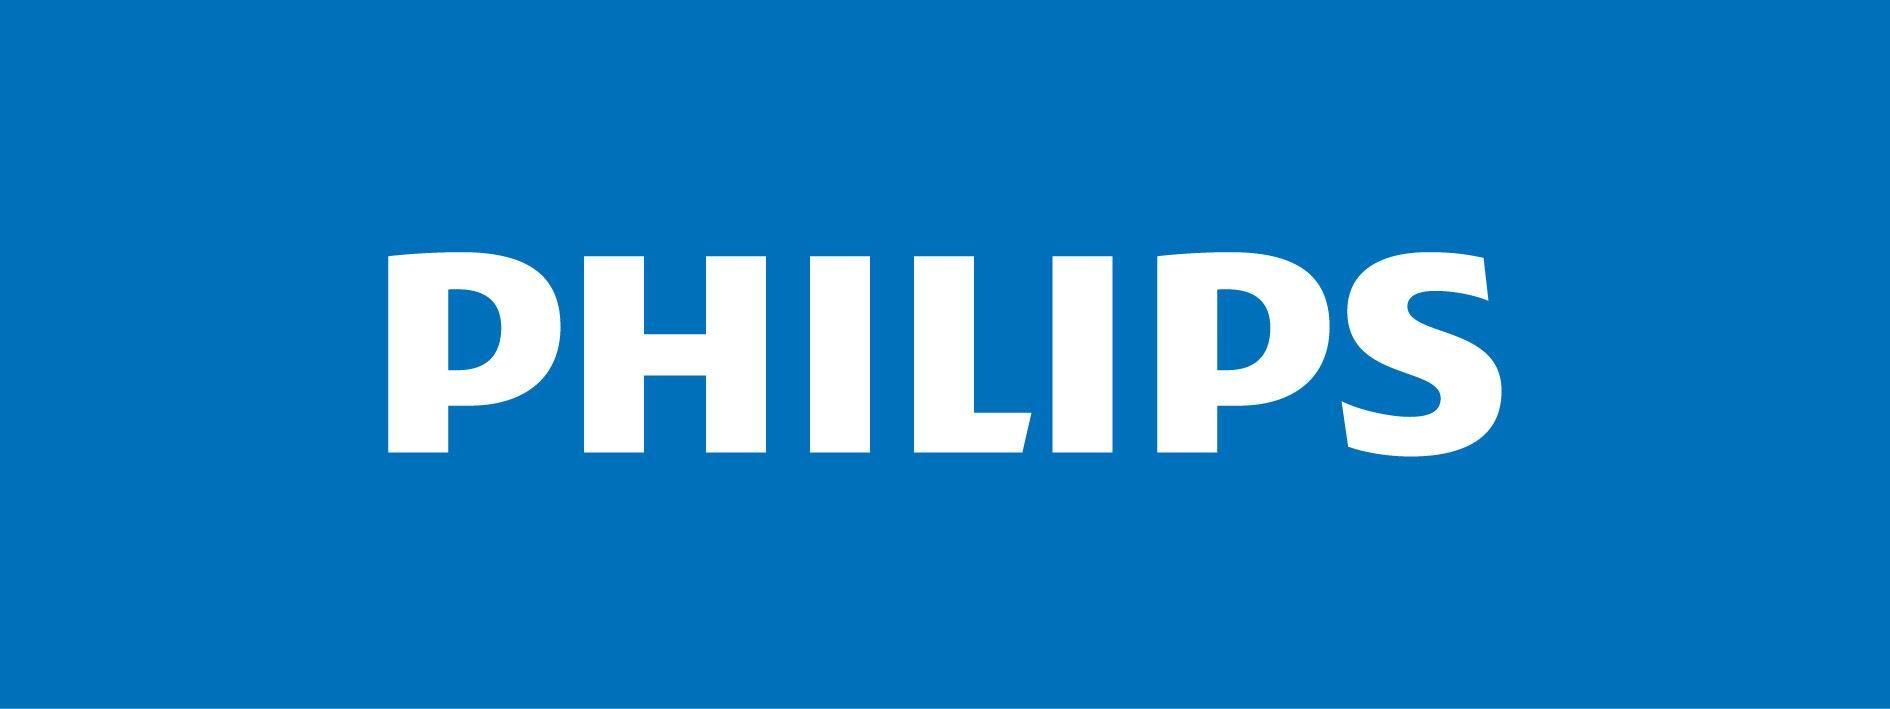 New Philips Logo - Philips announces a new UHD television powered by Android 4.2.2